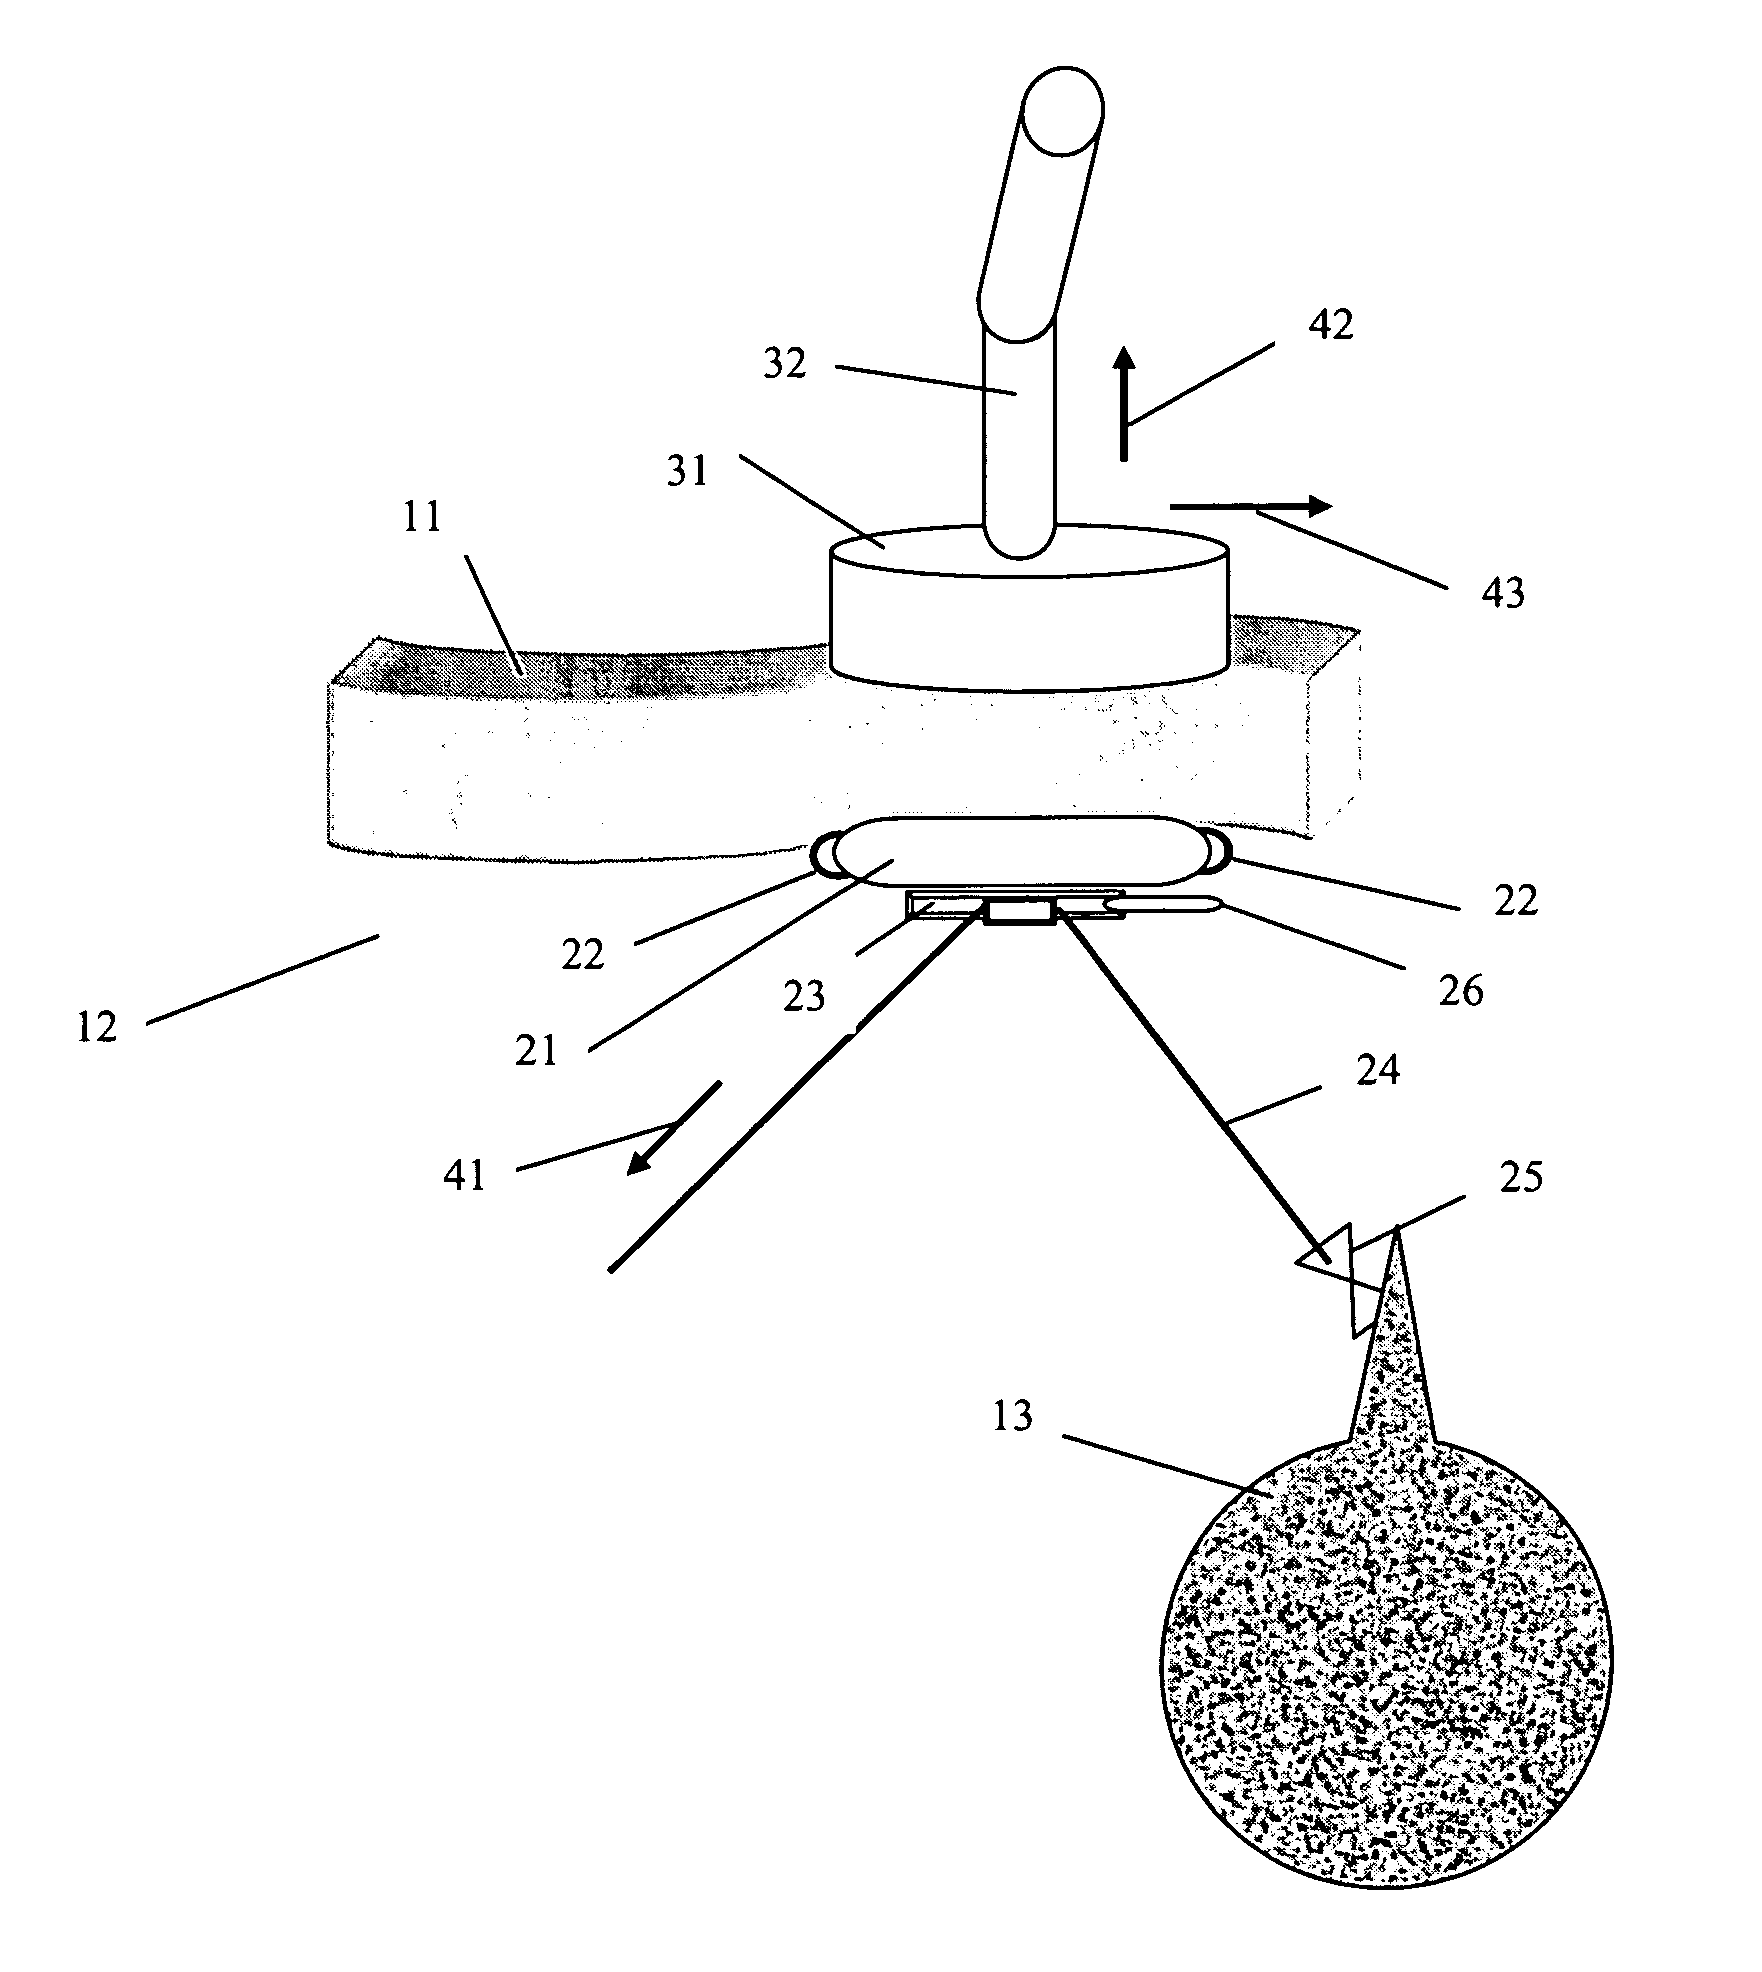 Virtual ports devices and method